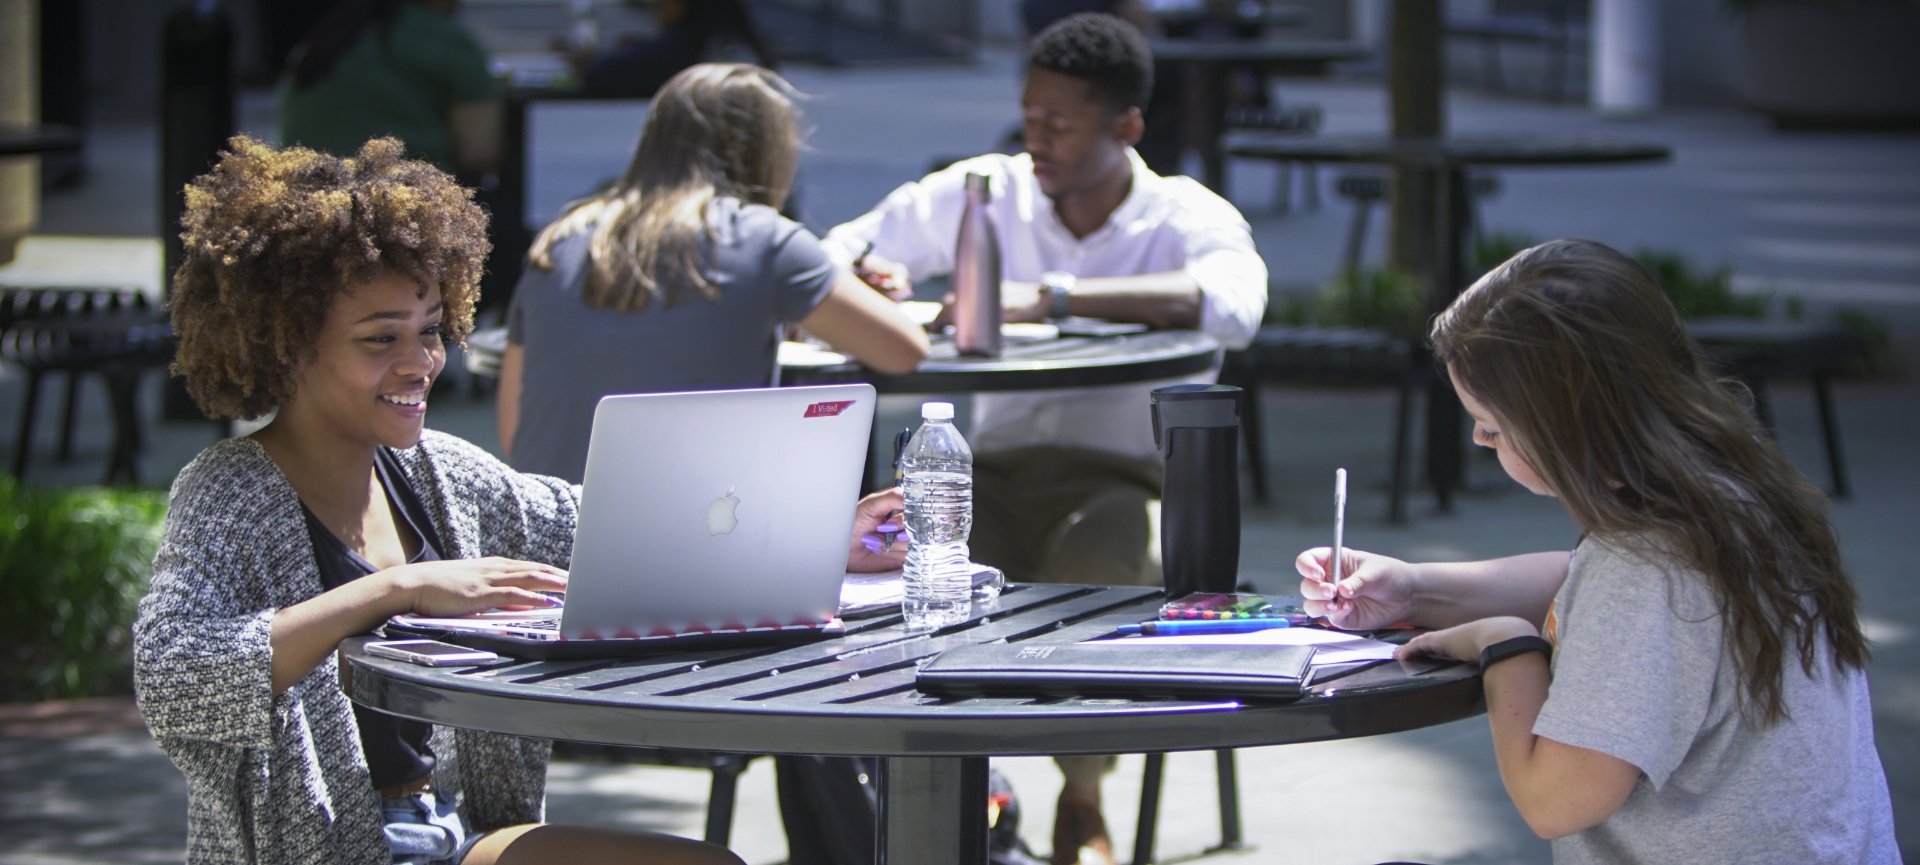 students studying outside at a table